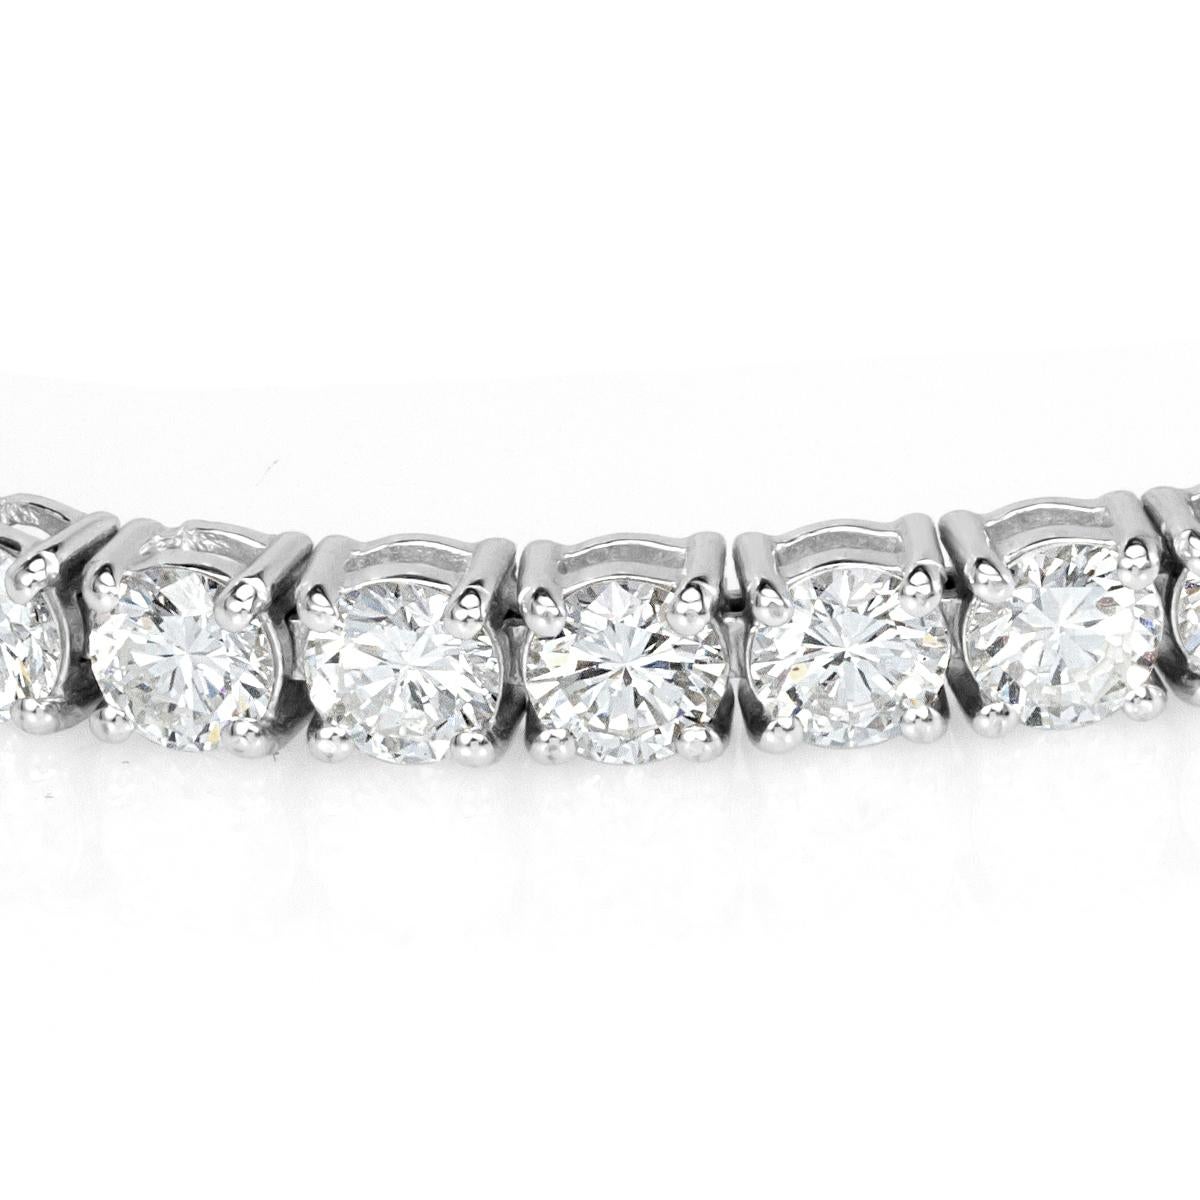 This stunning diamond tennis bracelet showcases 10.55ct of impeccably matched round brilliant cut diamonds graded at F-G in color, VS2-SI1 in clarity. They are set in a custom, 18k white gold setting measuring 7 inches. It truly has unparalleled